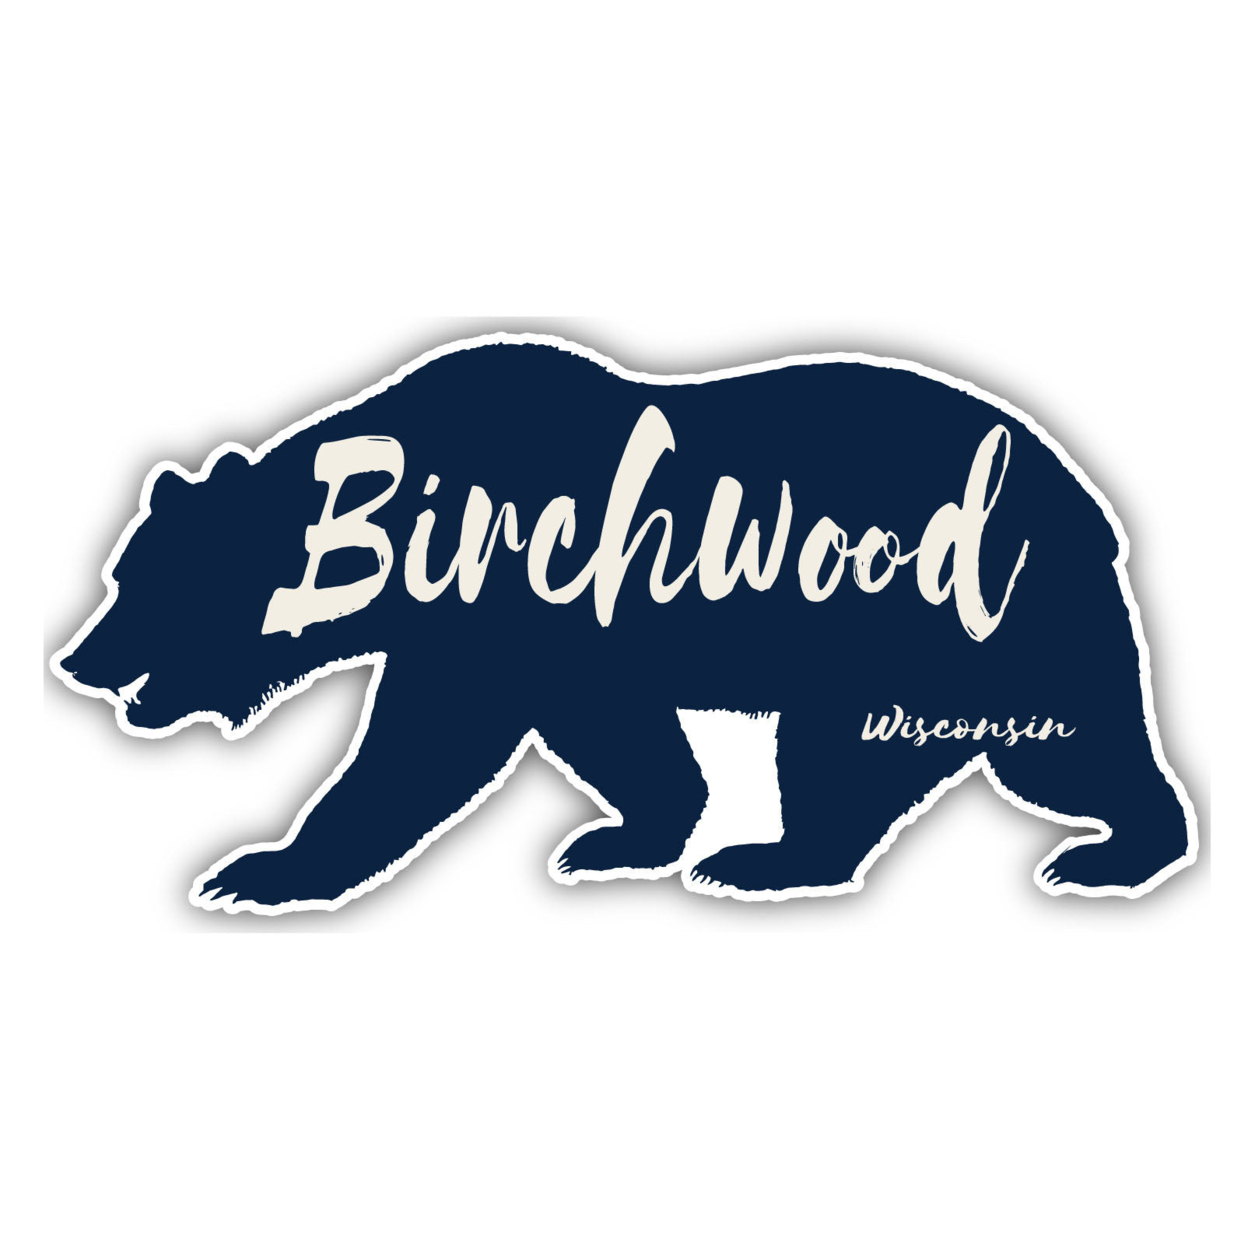 Birchwood Wisconsin Souvenir Decorative Stickers (Choose Theme And Size) - 4-Pack, 8-Inch, Bear